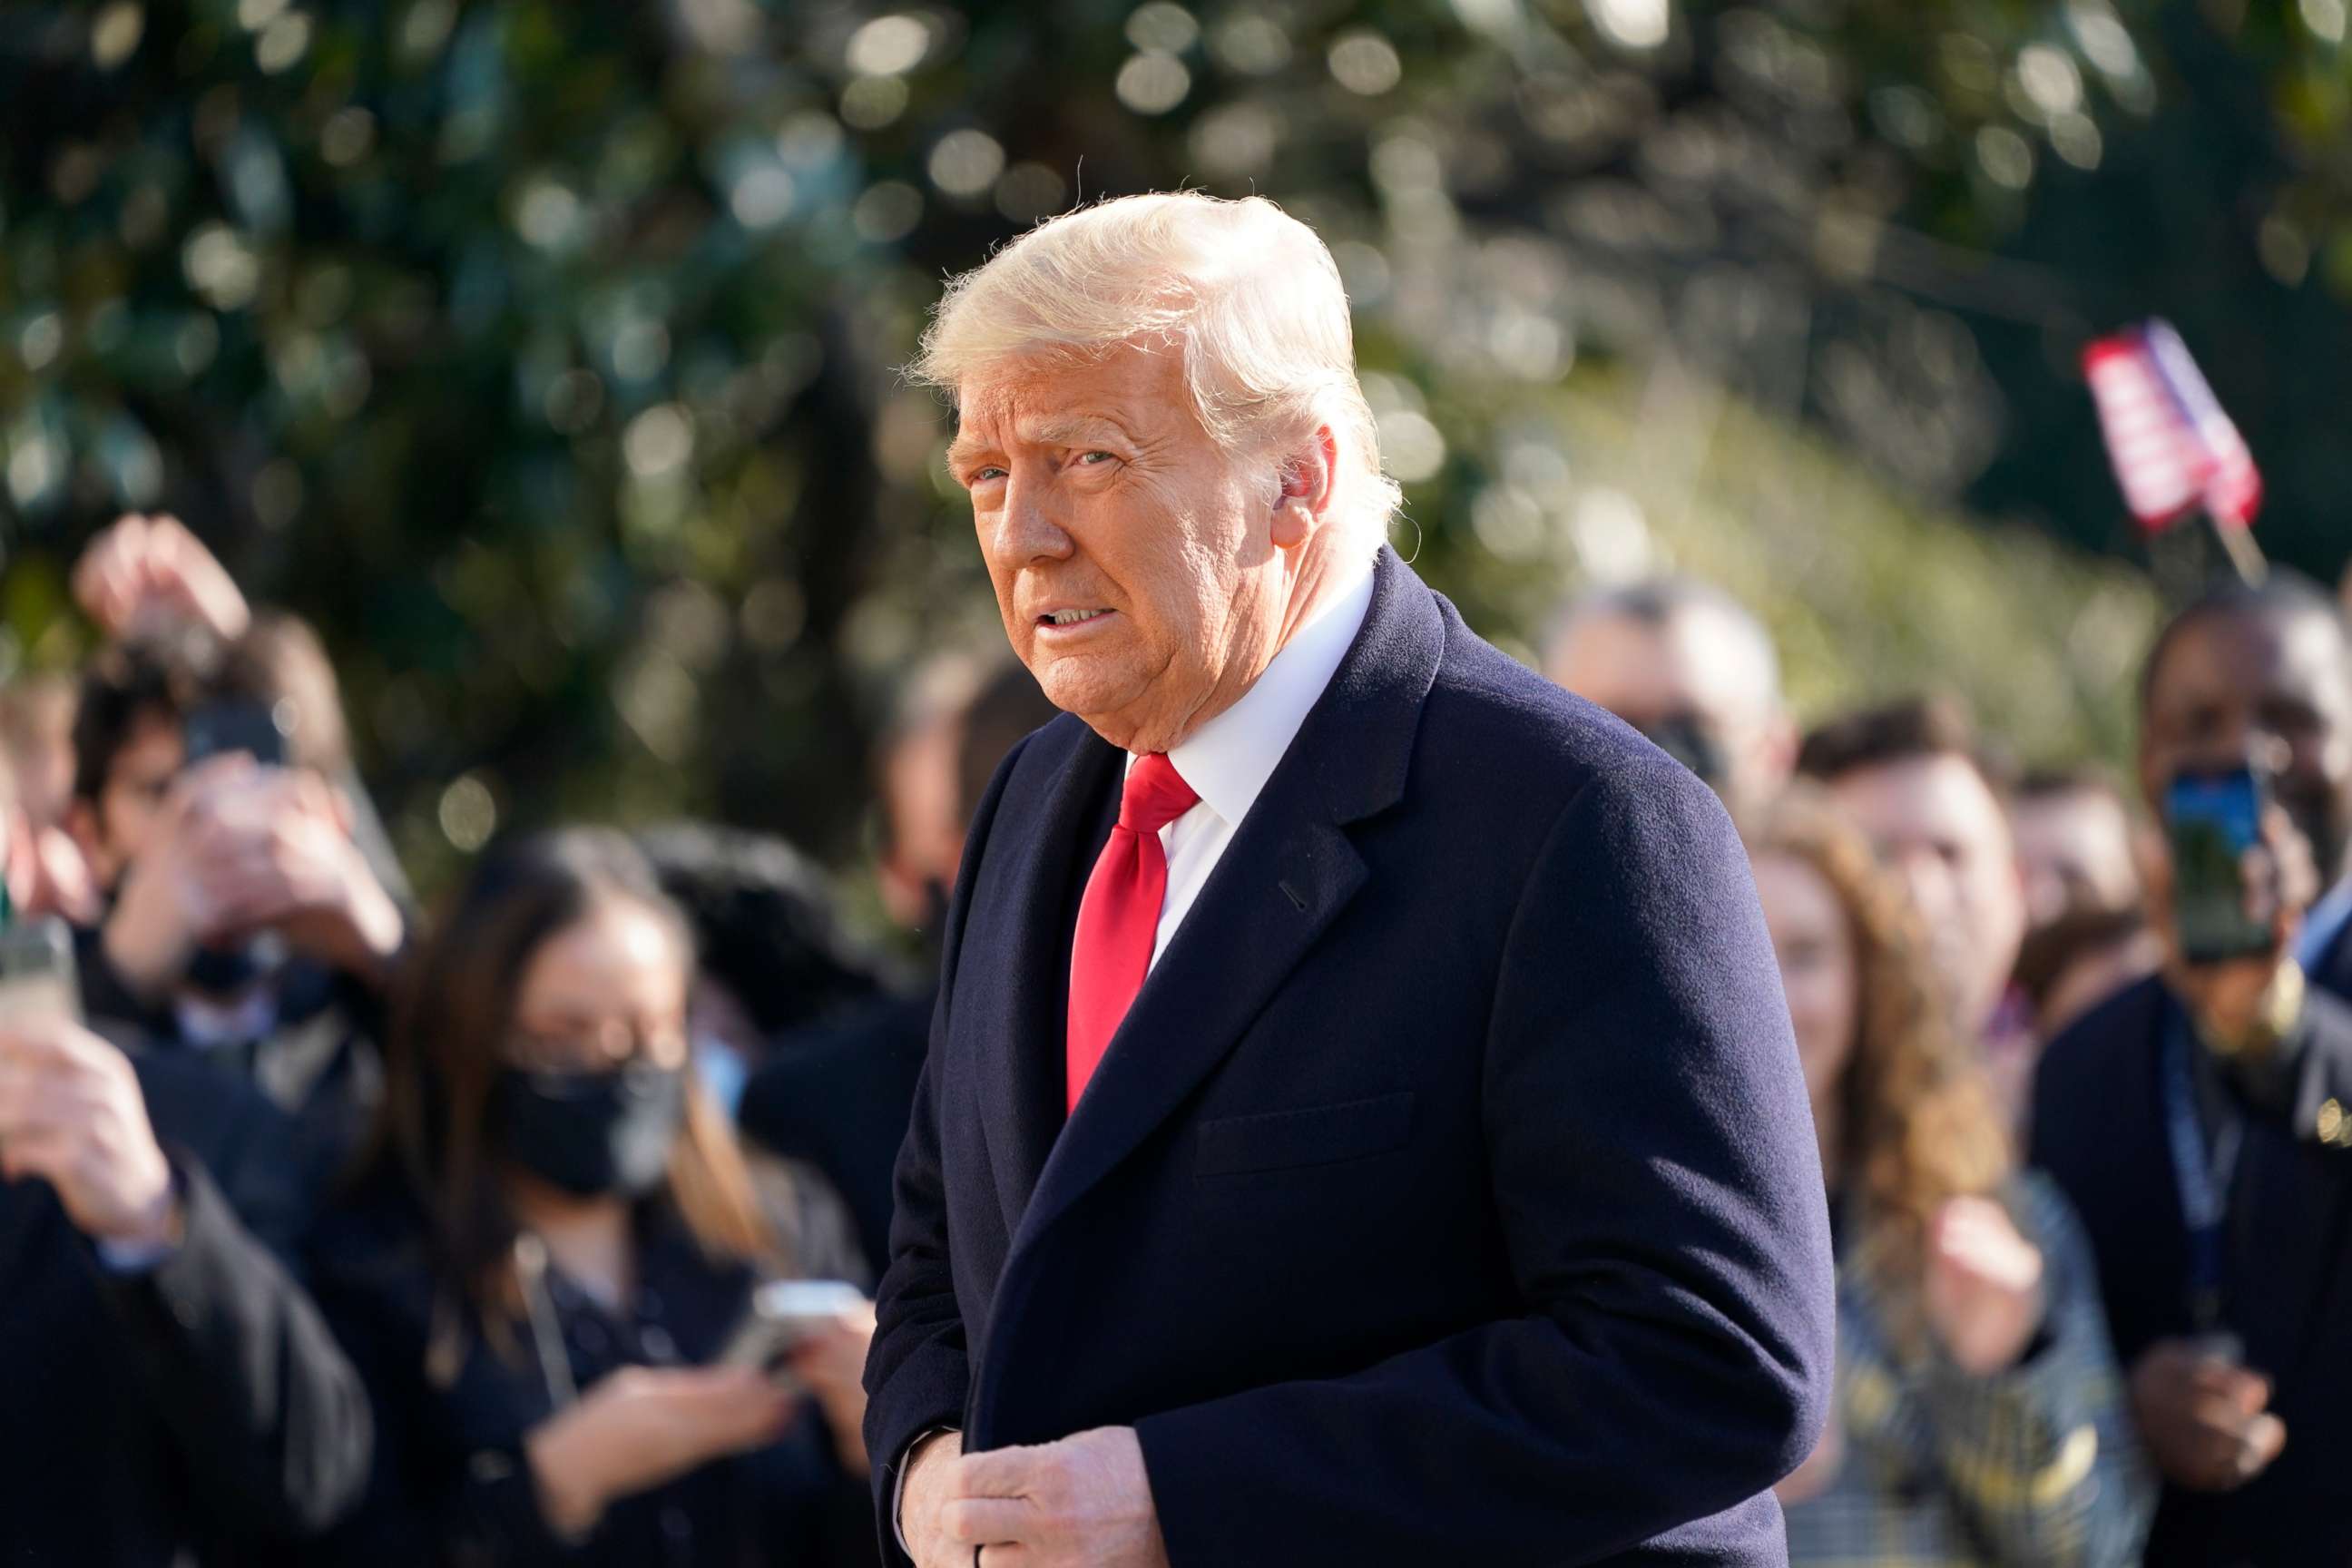 PHOTO: President Donald Trump walks to board Marine One on the South Lawn of the White House, Jan. 12, 2021 in Washington.